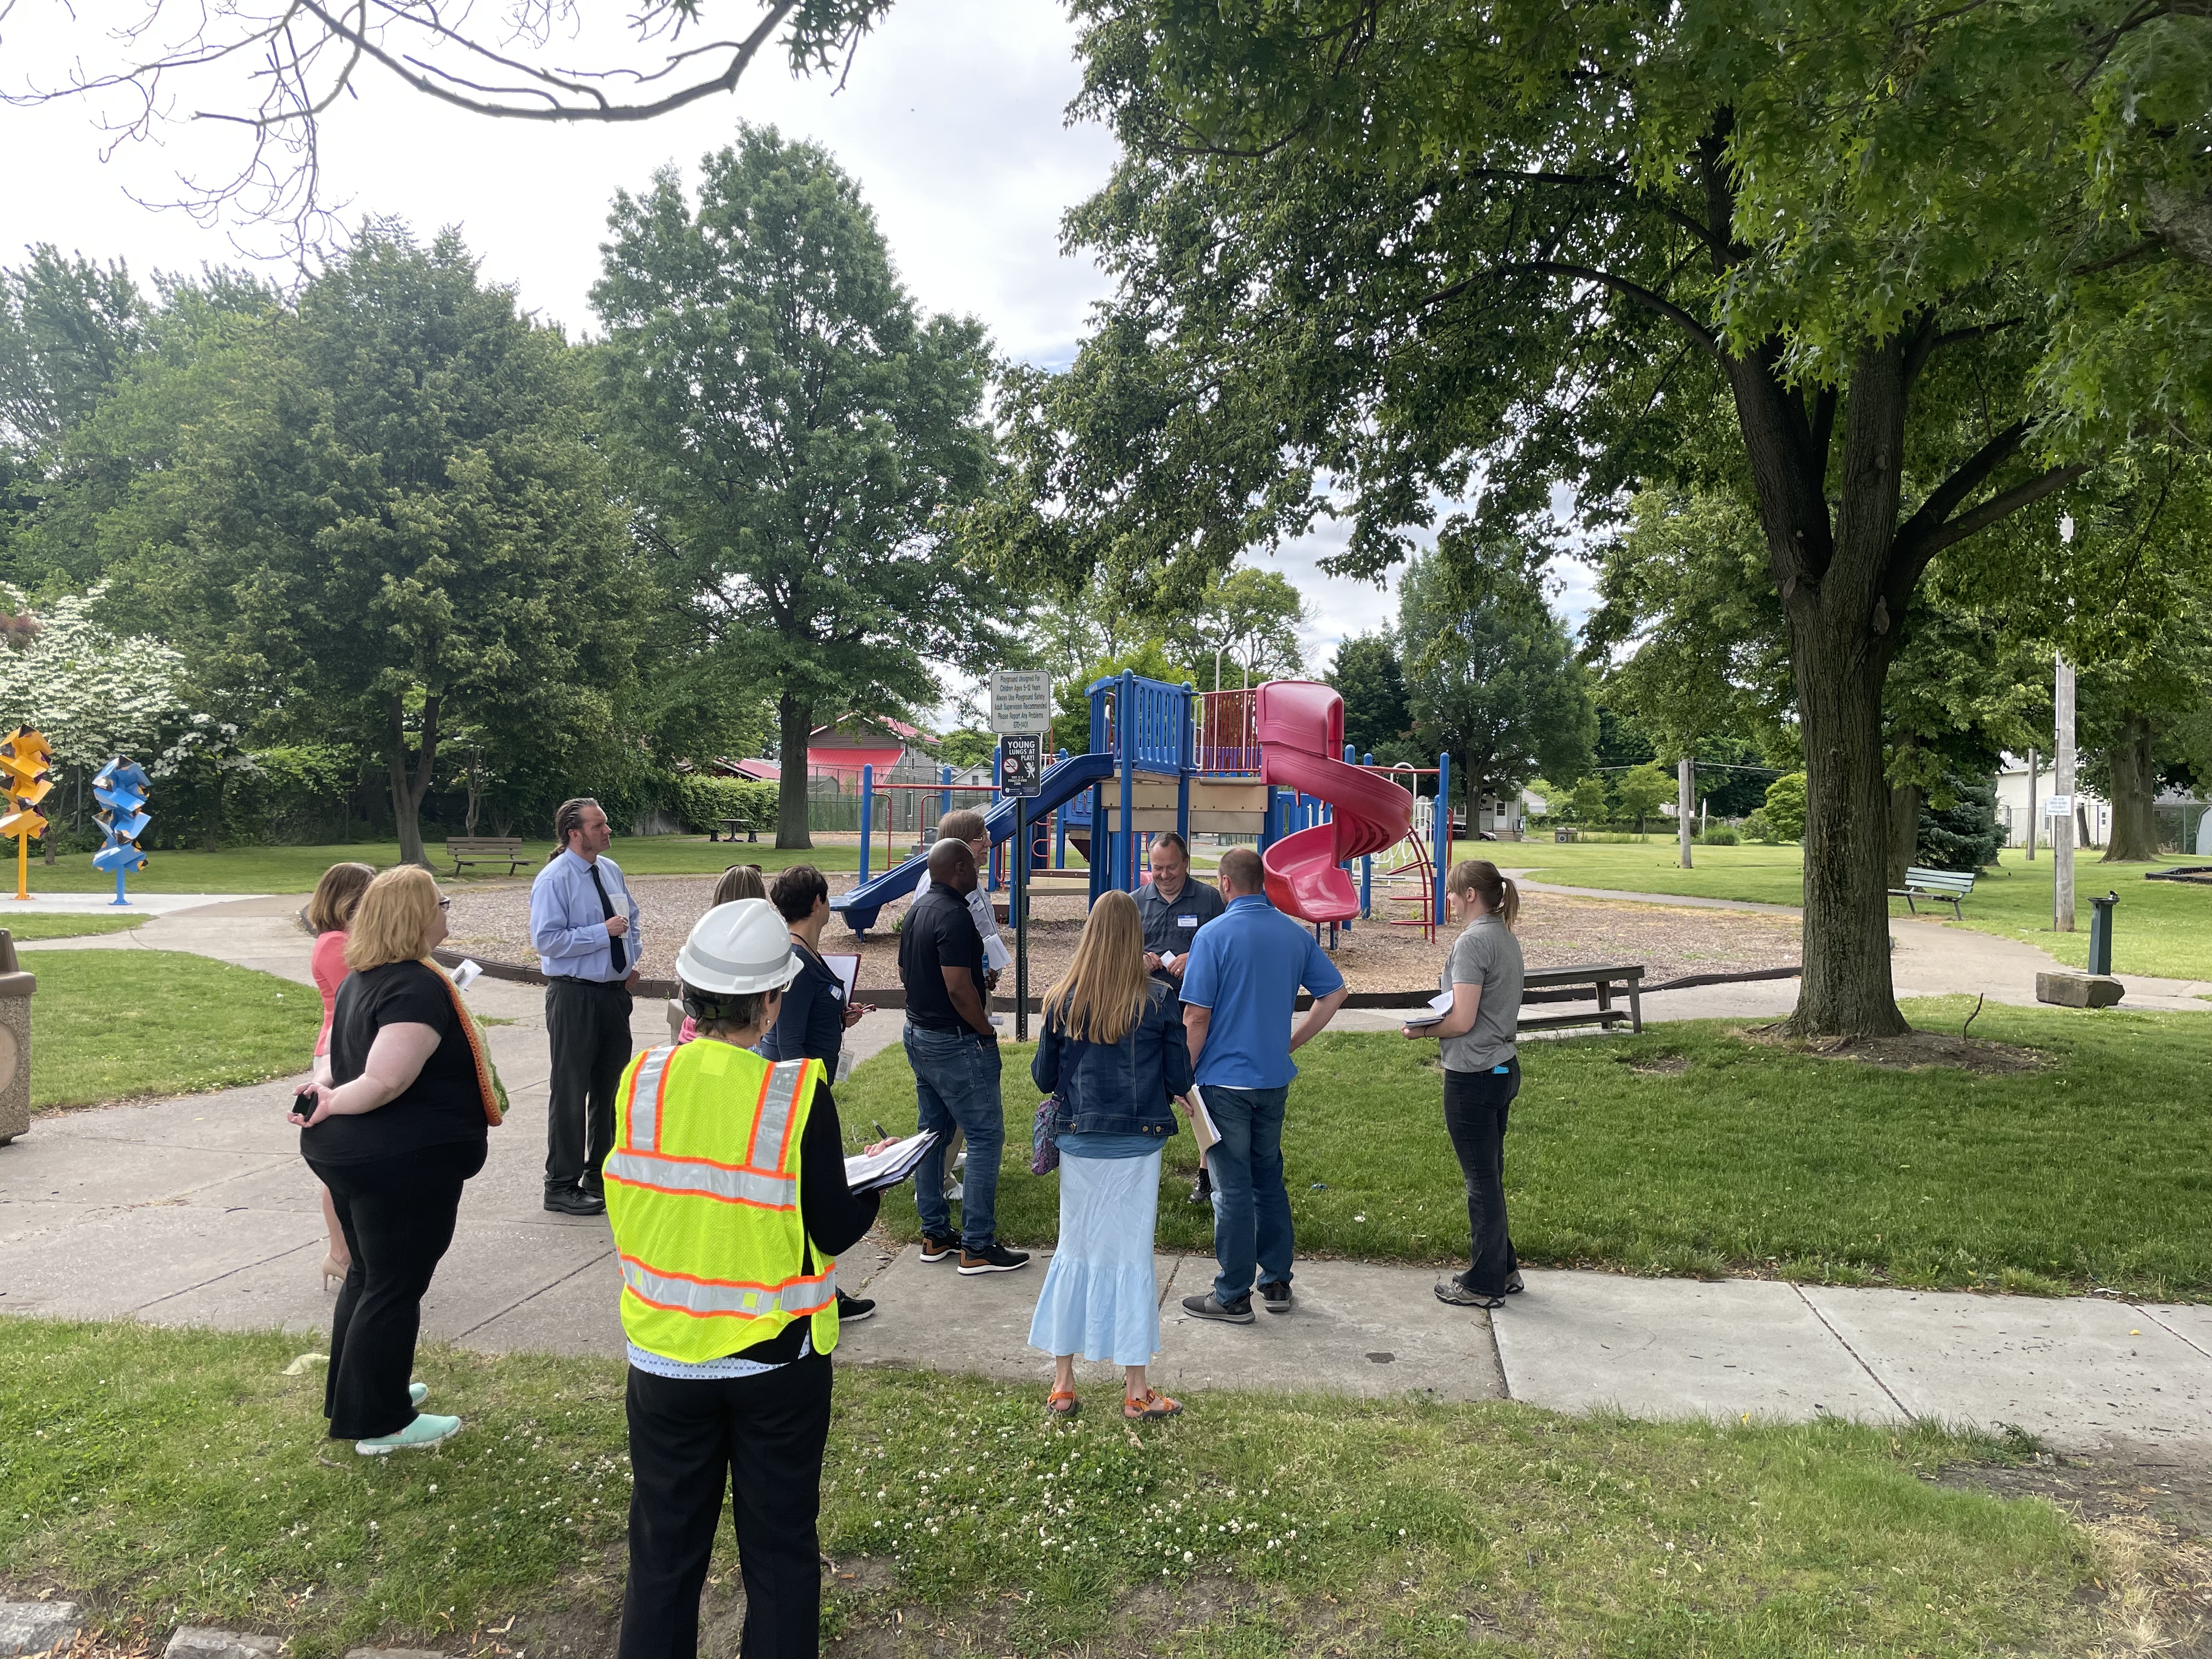 group of people standing park in front of playground equipment